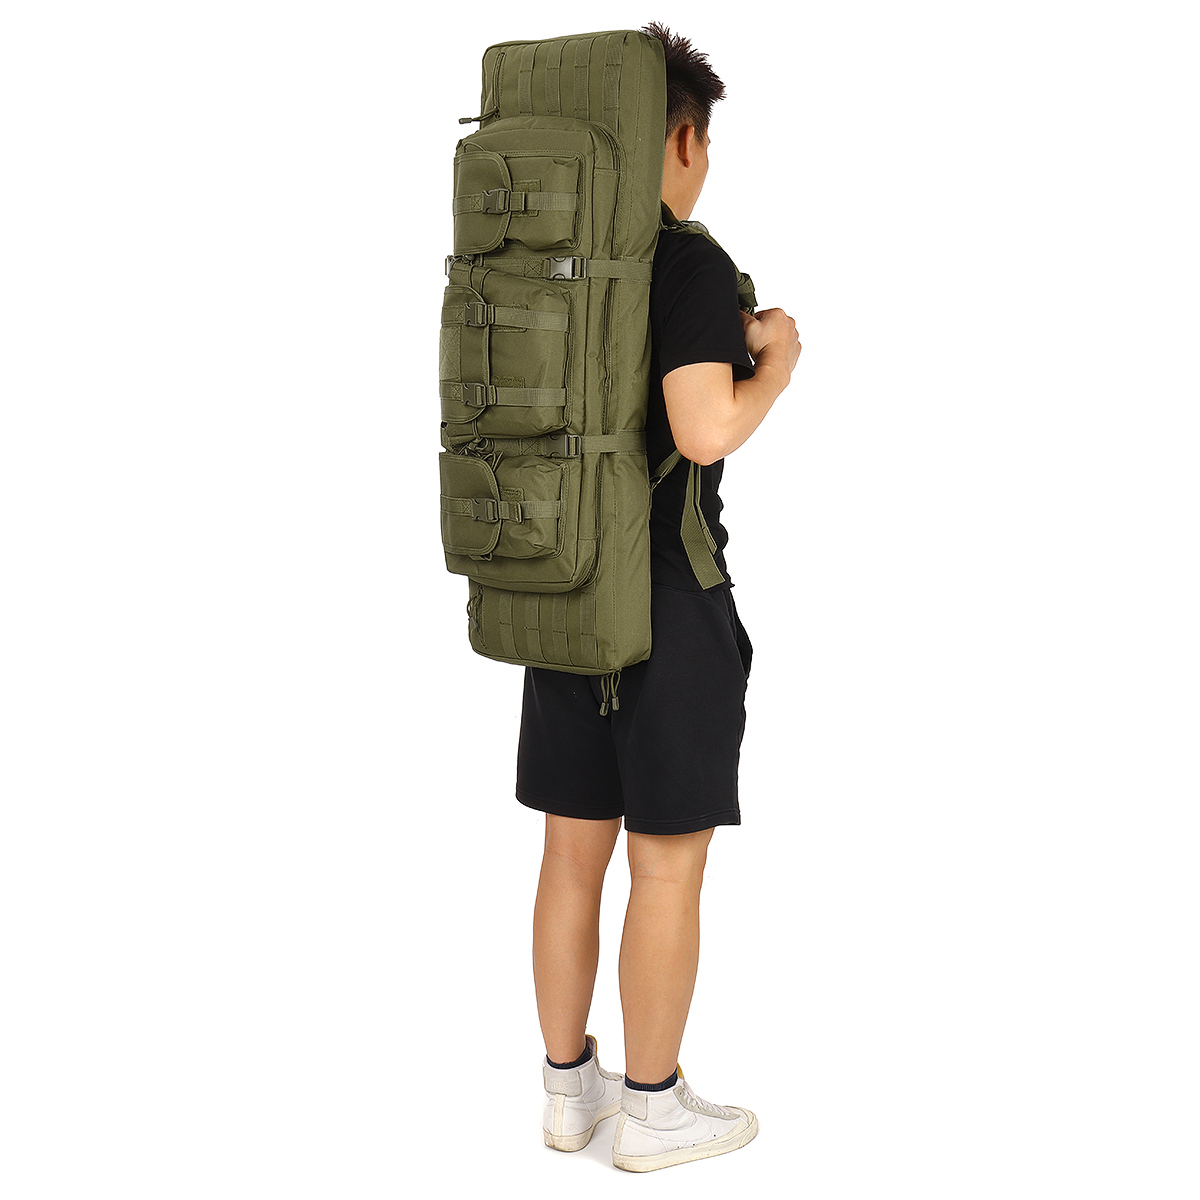 36inch-Tactical-Camouflage-Fishing-Tackle-Camping-Bag-Multifunctional-Storage-Bag-Double-Padded-Back-1853242-5